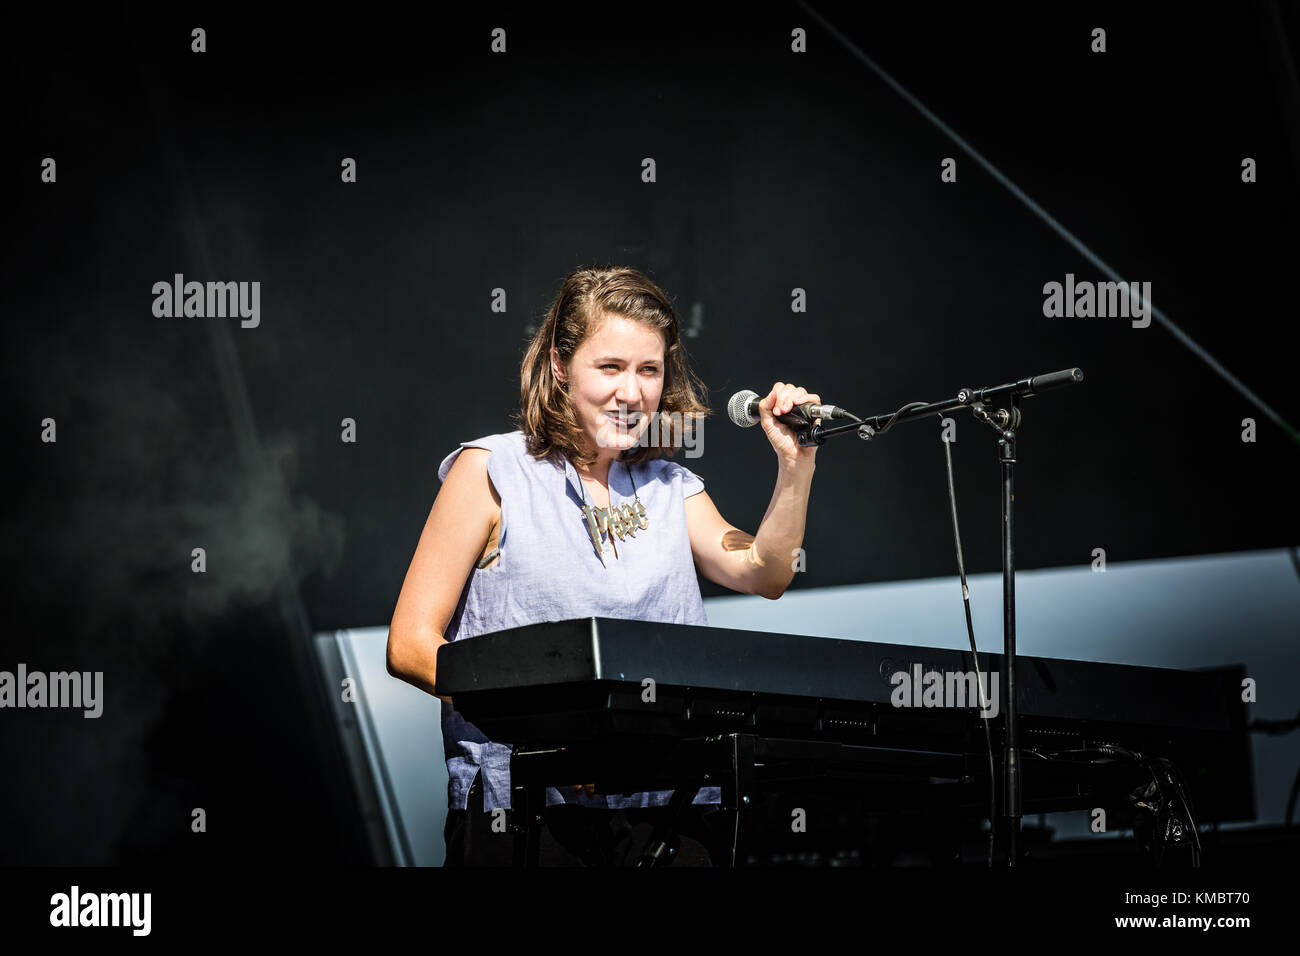 The German indie pop band Schnipo Schranke performs a live concert at the German  music festival Open Source Festival 2016 in Düsseldorf. The band consists  of the two musicians and singers Daniela